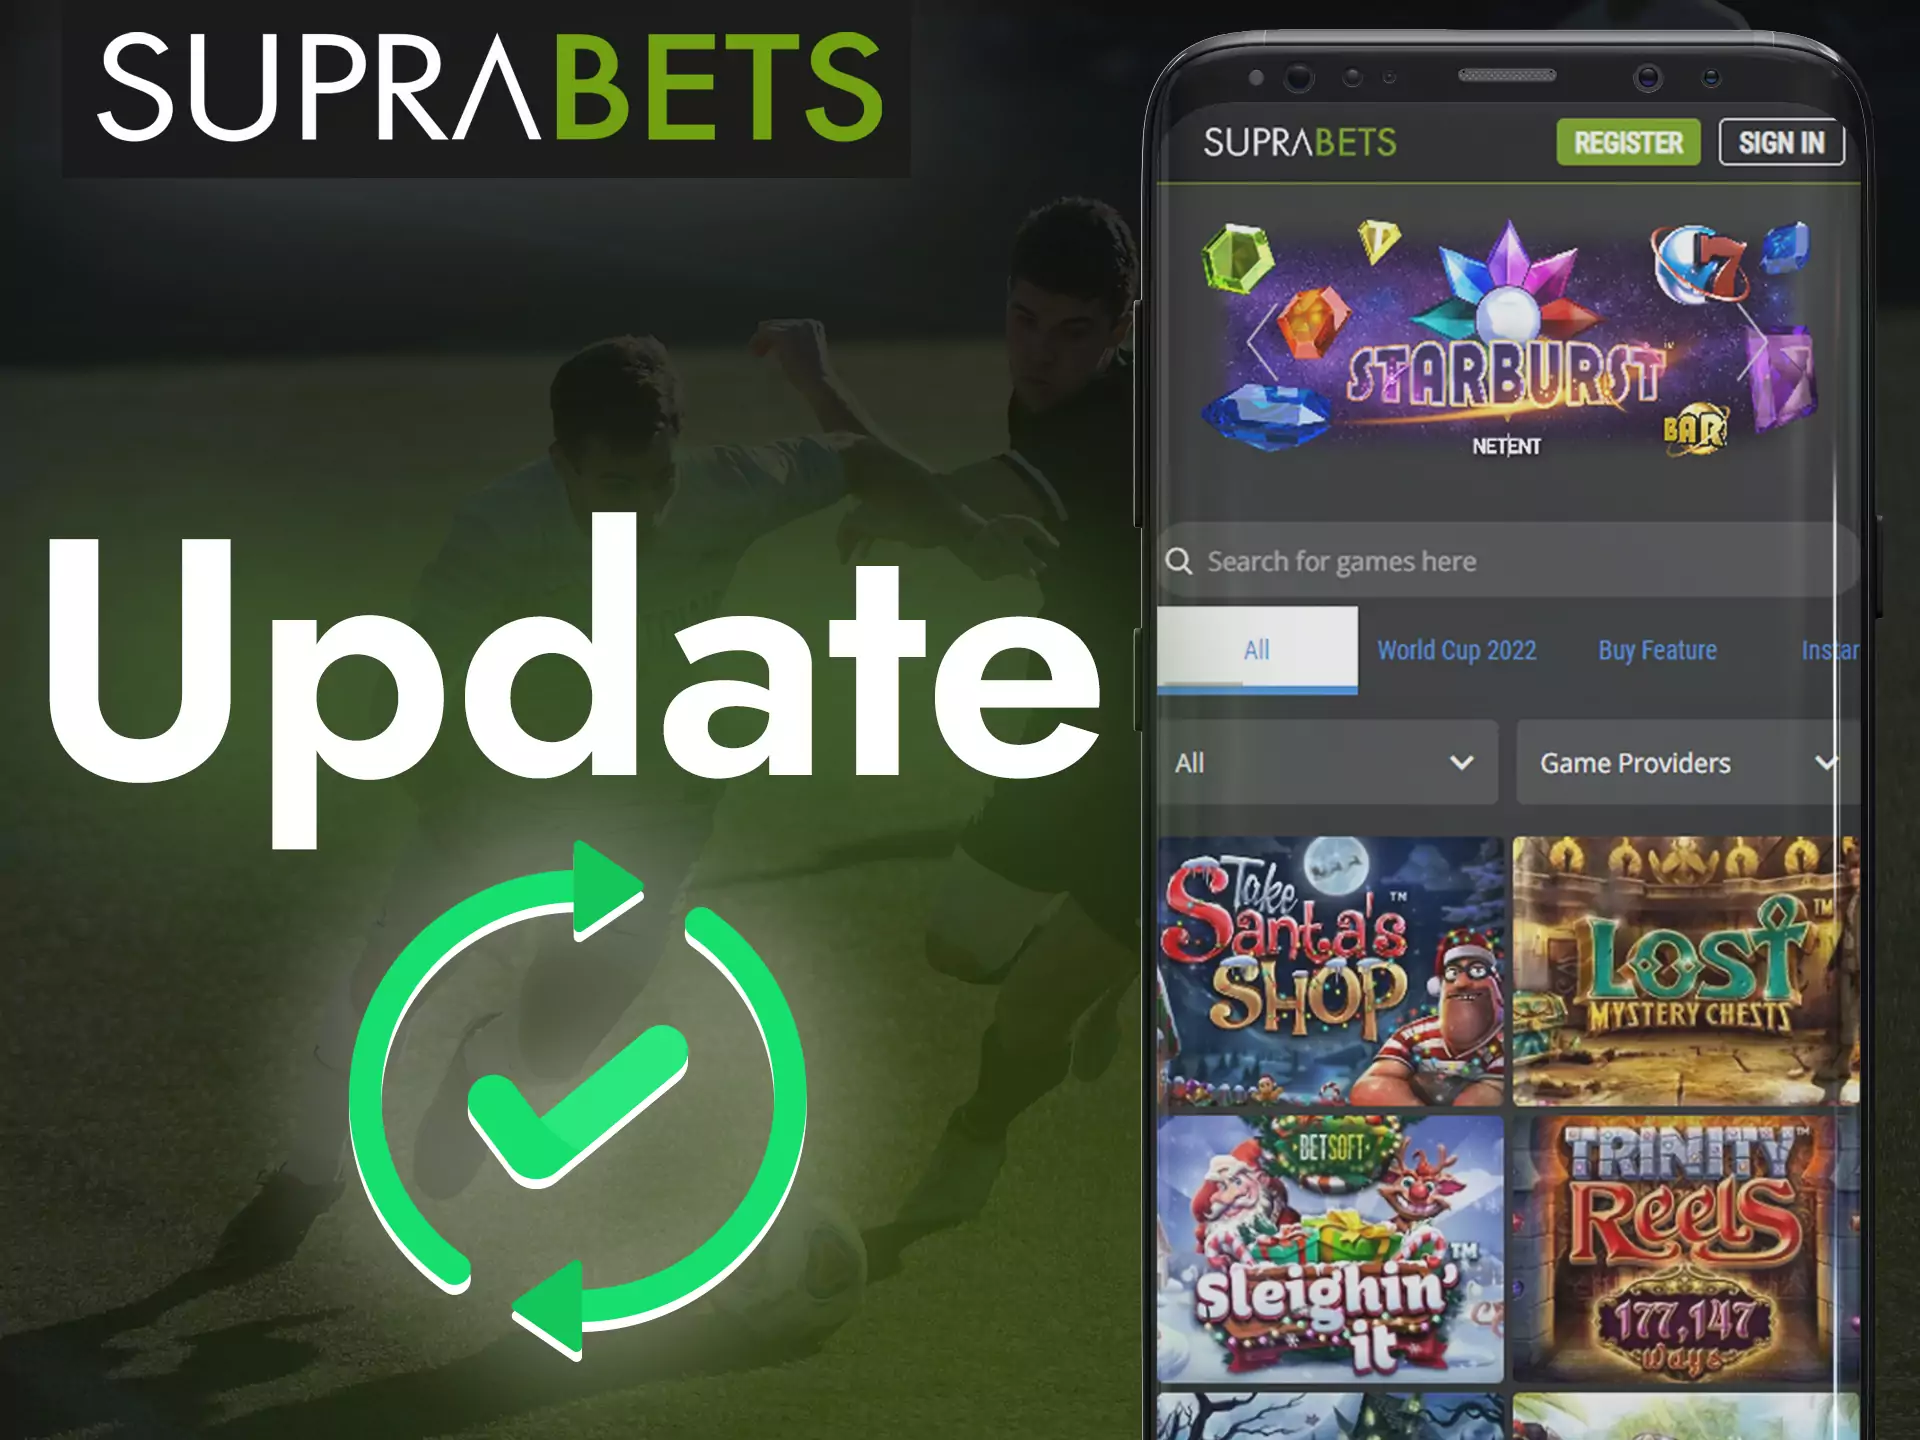 Update the Suprabets app to the latest version.